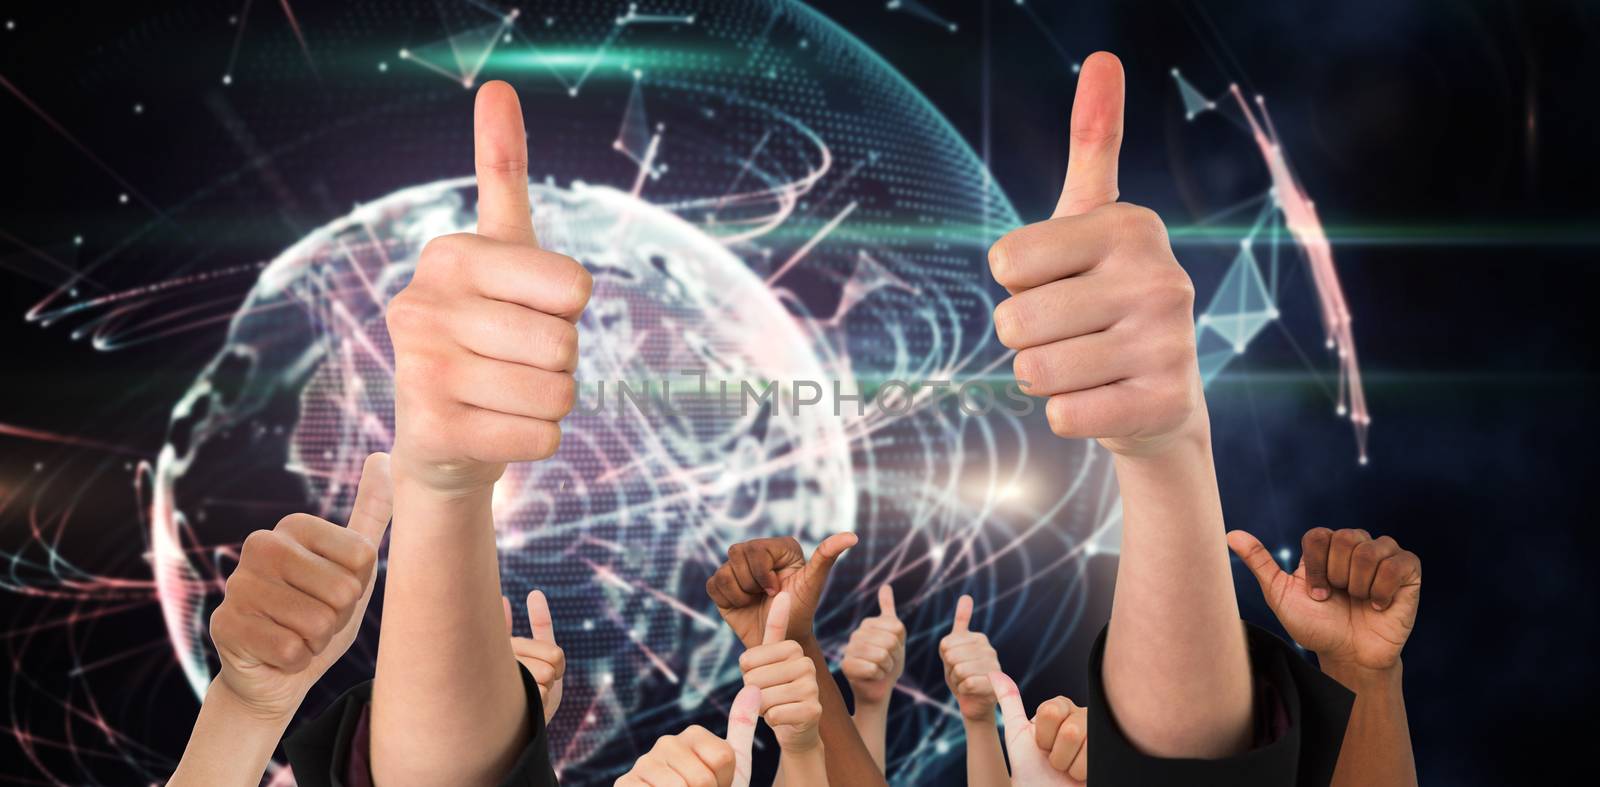 Hands showing thumbs up against global technology background in blue